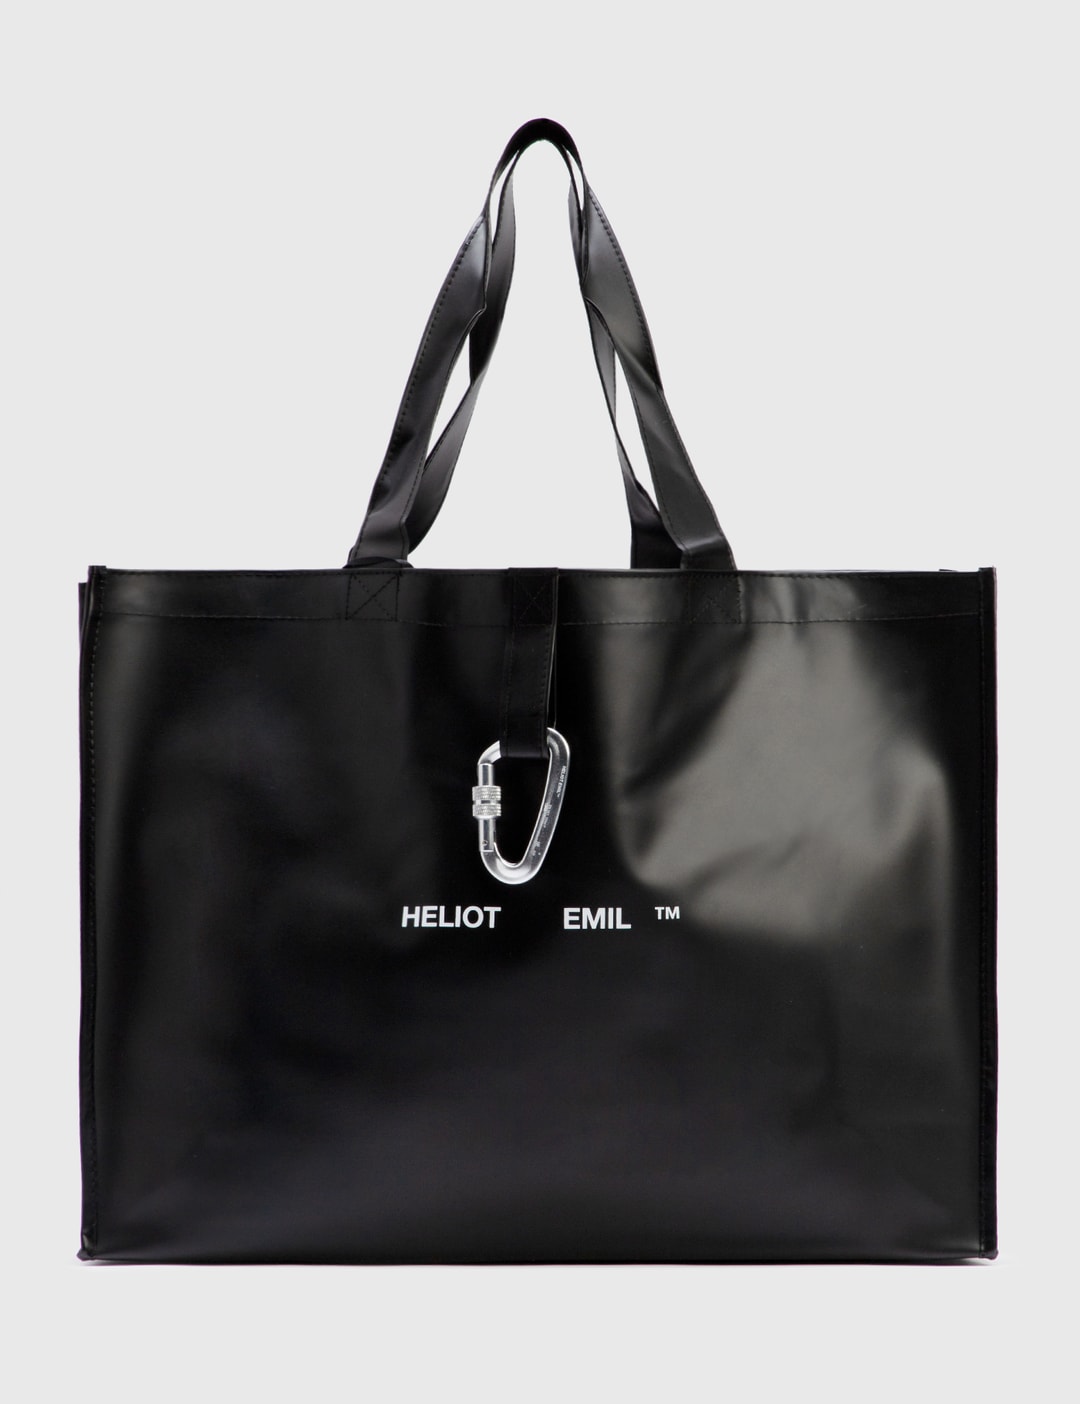 Recept satellit Skim Heliot Emil - Rubber Tote Bag | HBX - Globally Curated Fashion and  Lifestyle by Hypebeast